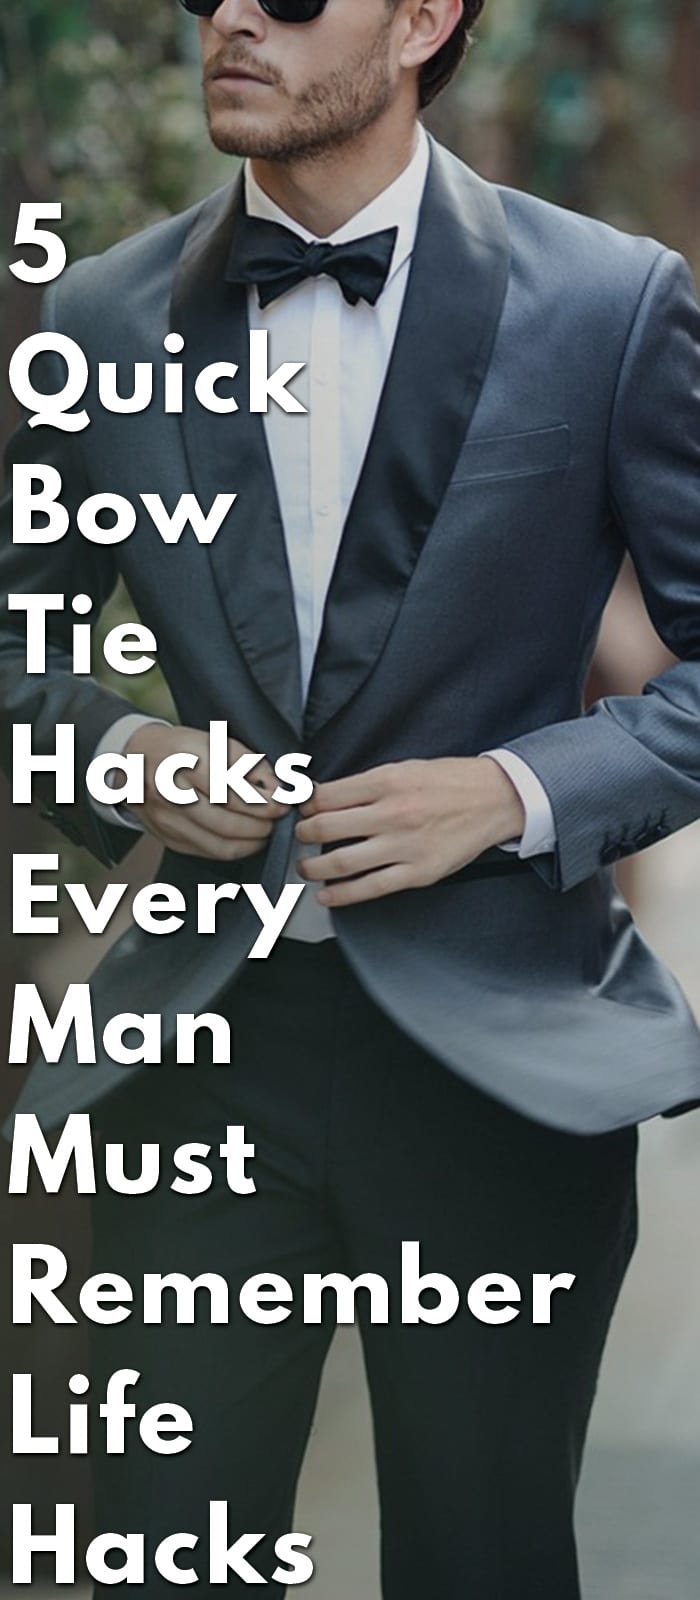 5-Quick-Bow-Tie-Hacks-Every-Man-Must-Remember--Life-Hacks